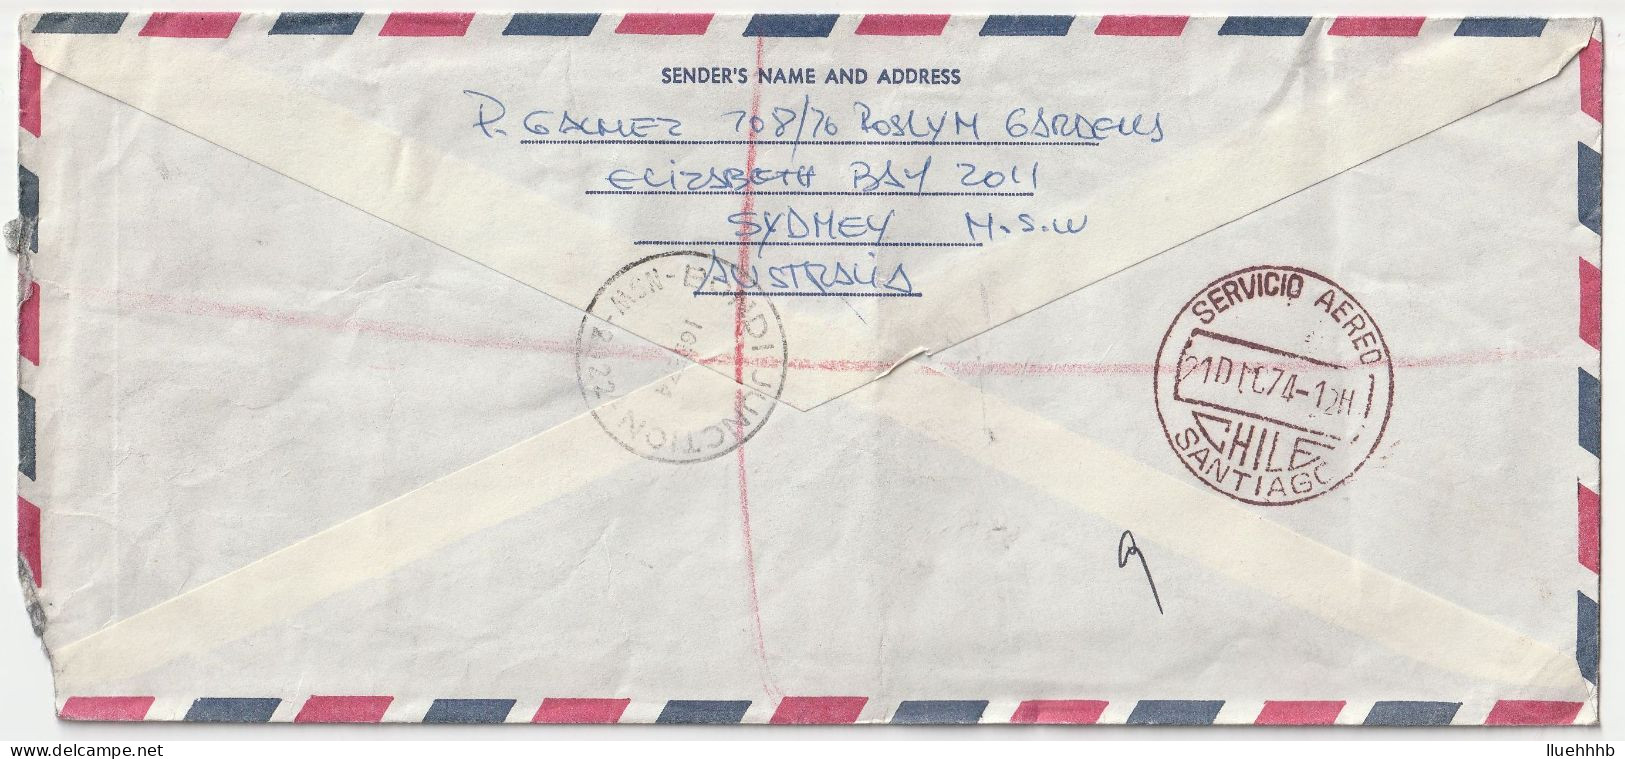 AUSTRALIA: 1974 Registered Airmail Cover To CHILE, $1.35 Rate - Covers & Documents